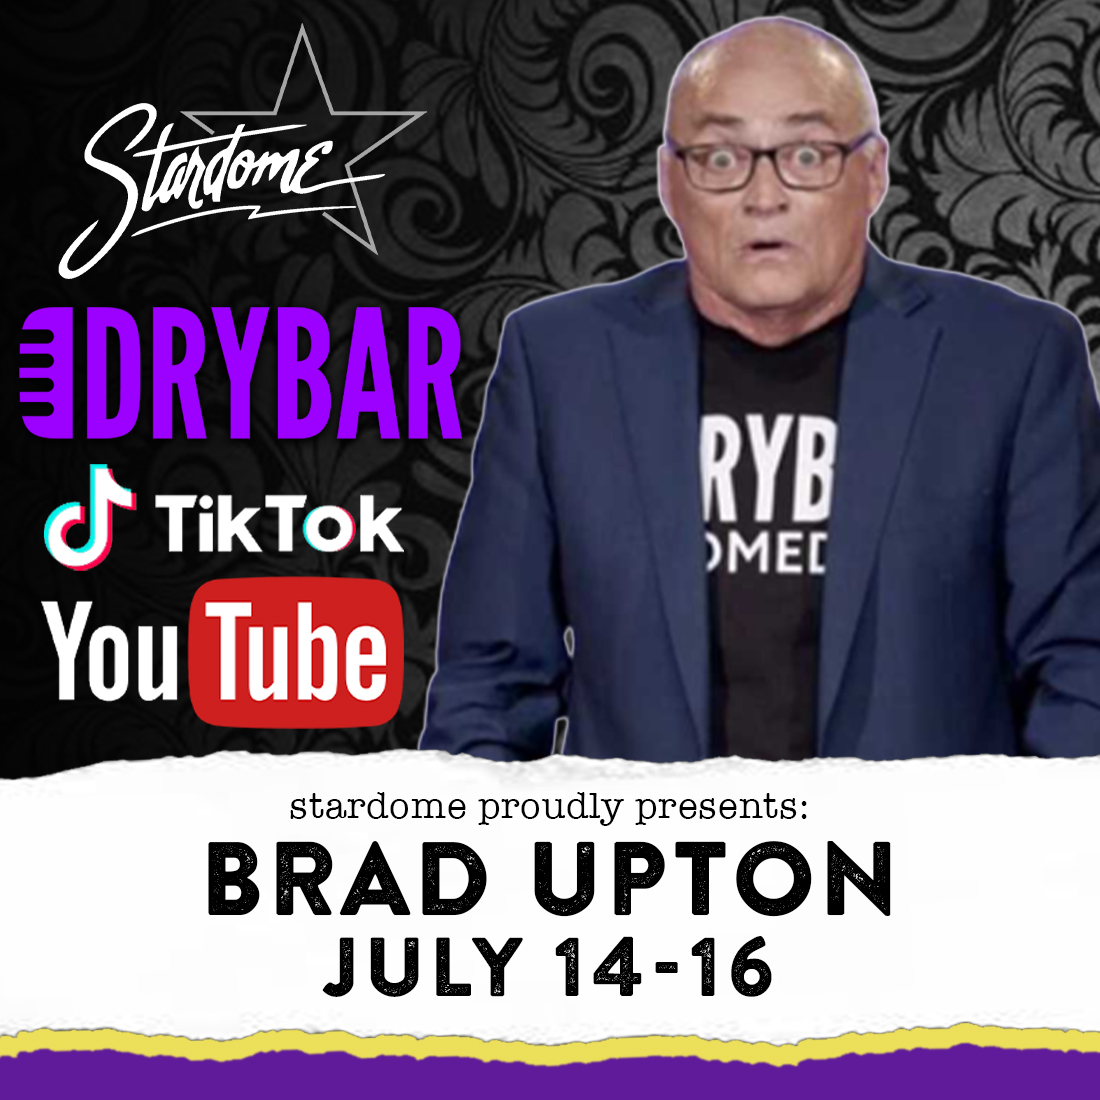 🧼 CLEAN COMEDY SERIES
Comedian Brad Upton returns to the StarDome July 14-16! Brad is Dry Bar Comedy’s most popular performer with over 160 million views. You know tickets won't last long so grab yours while you can, Birmingham--> bit.ly/StarDome_Upton